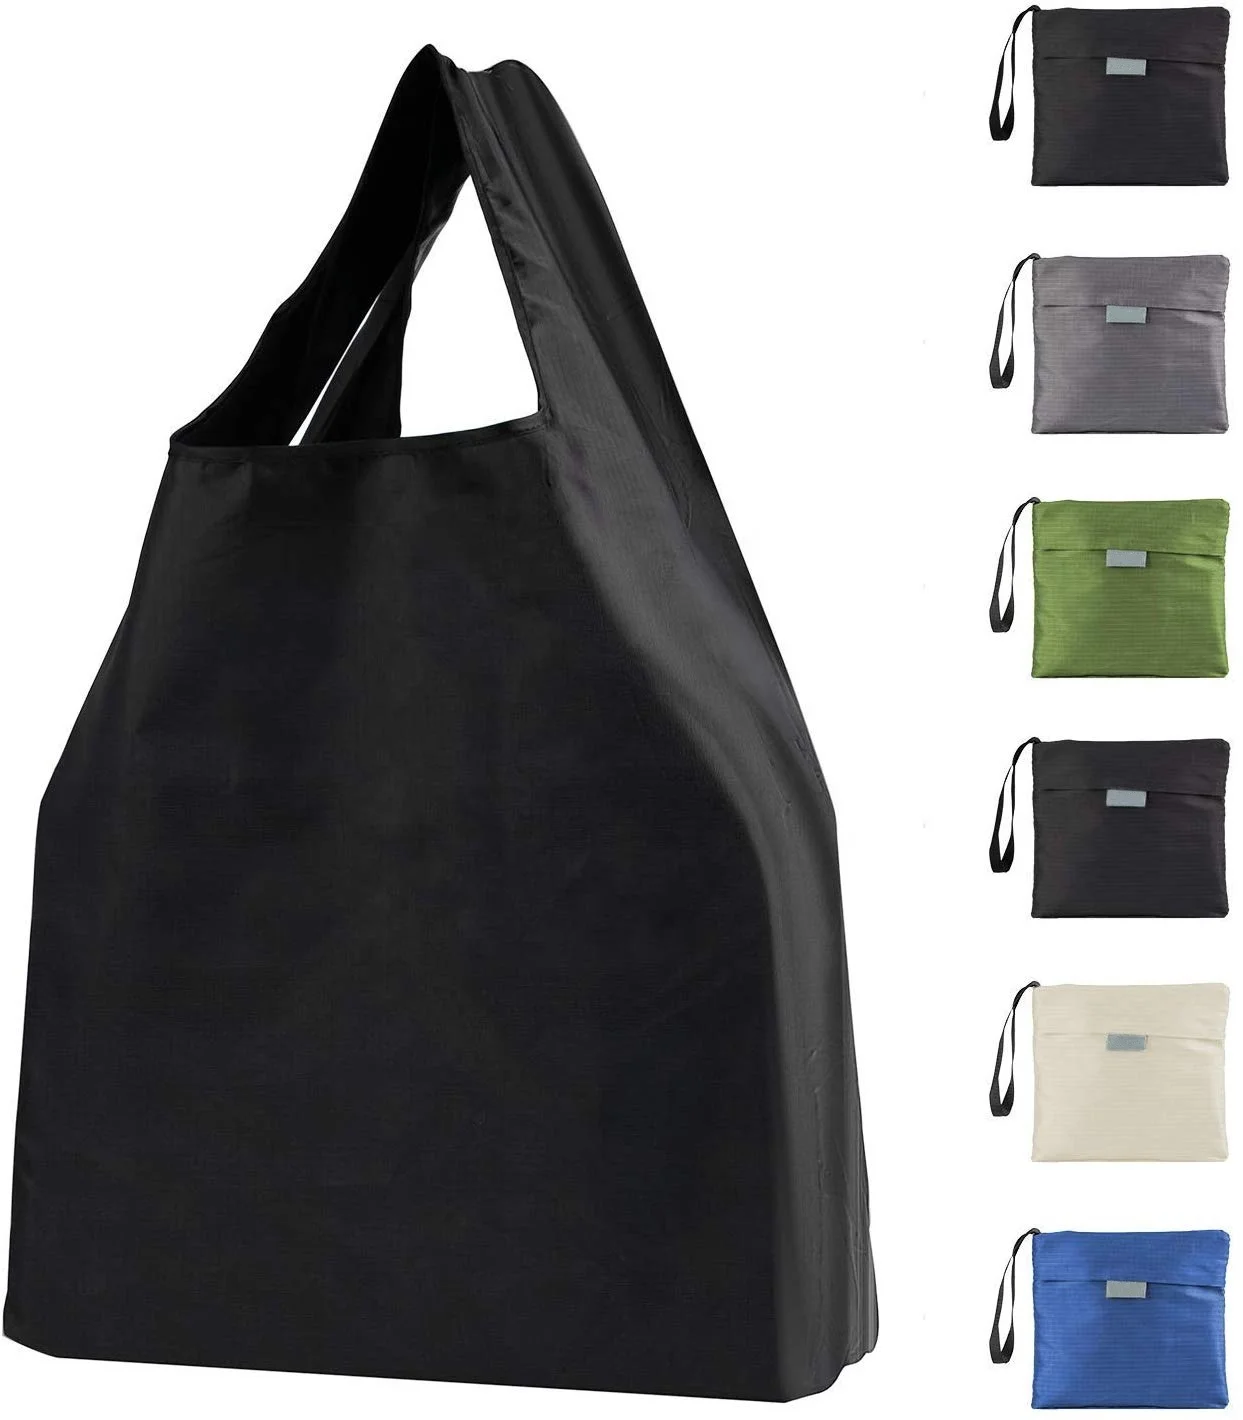 

Foldable Tote Shopping Bag With Pouch, 50 different colors